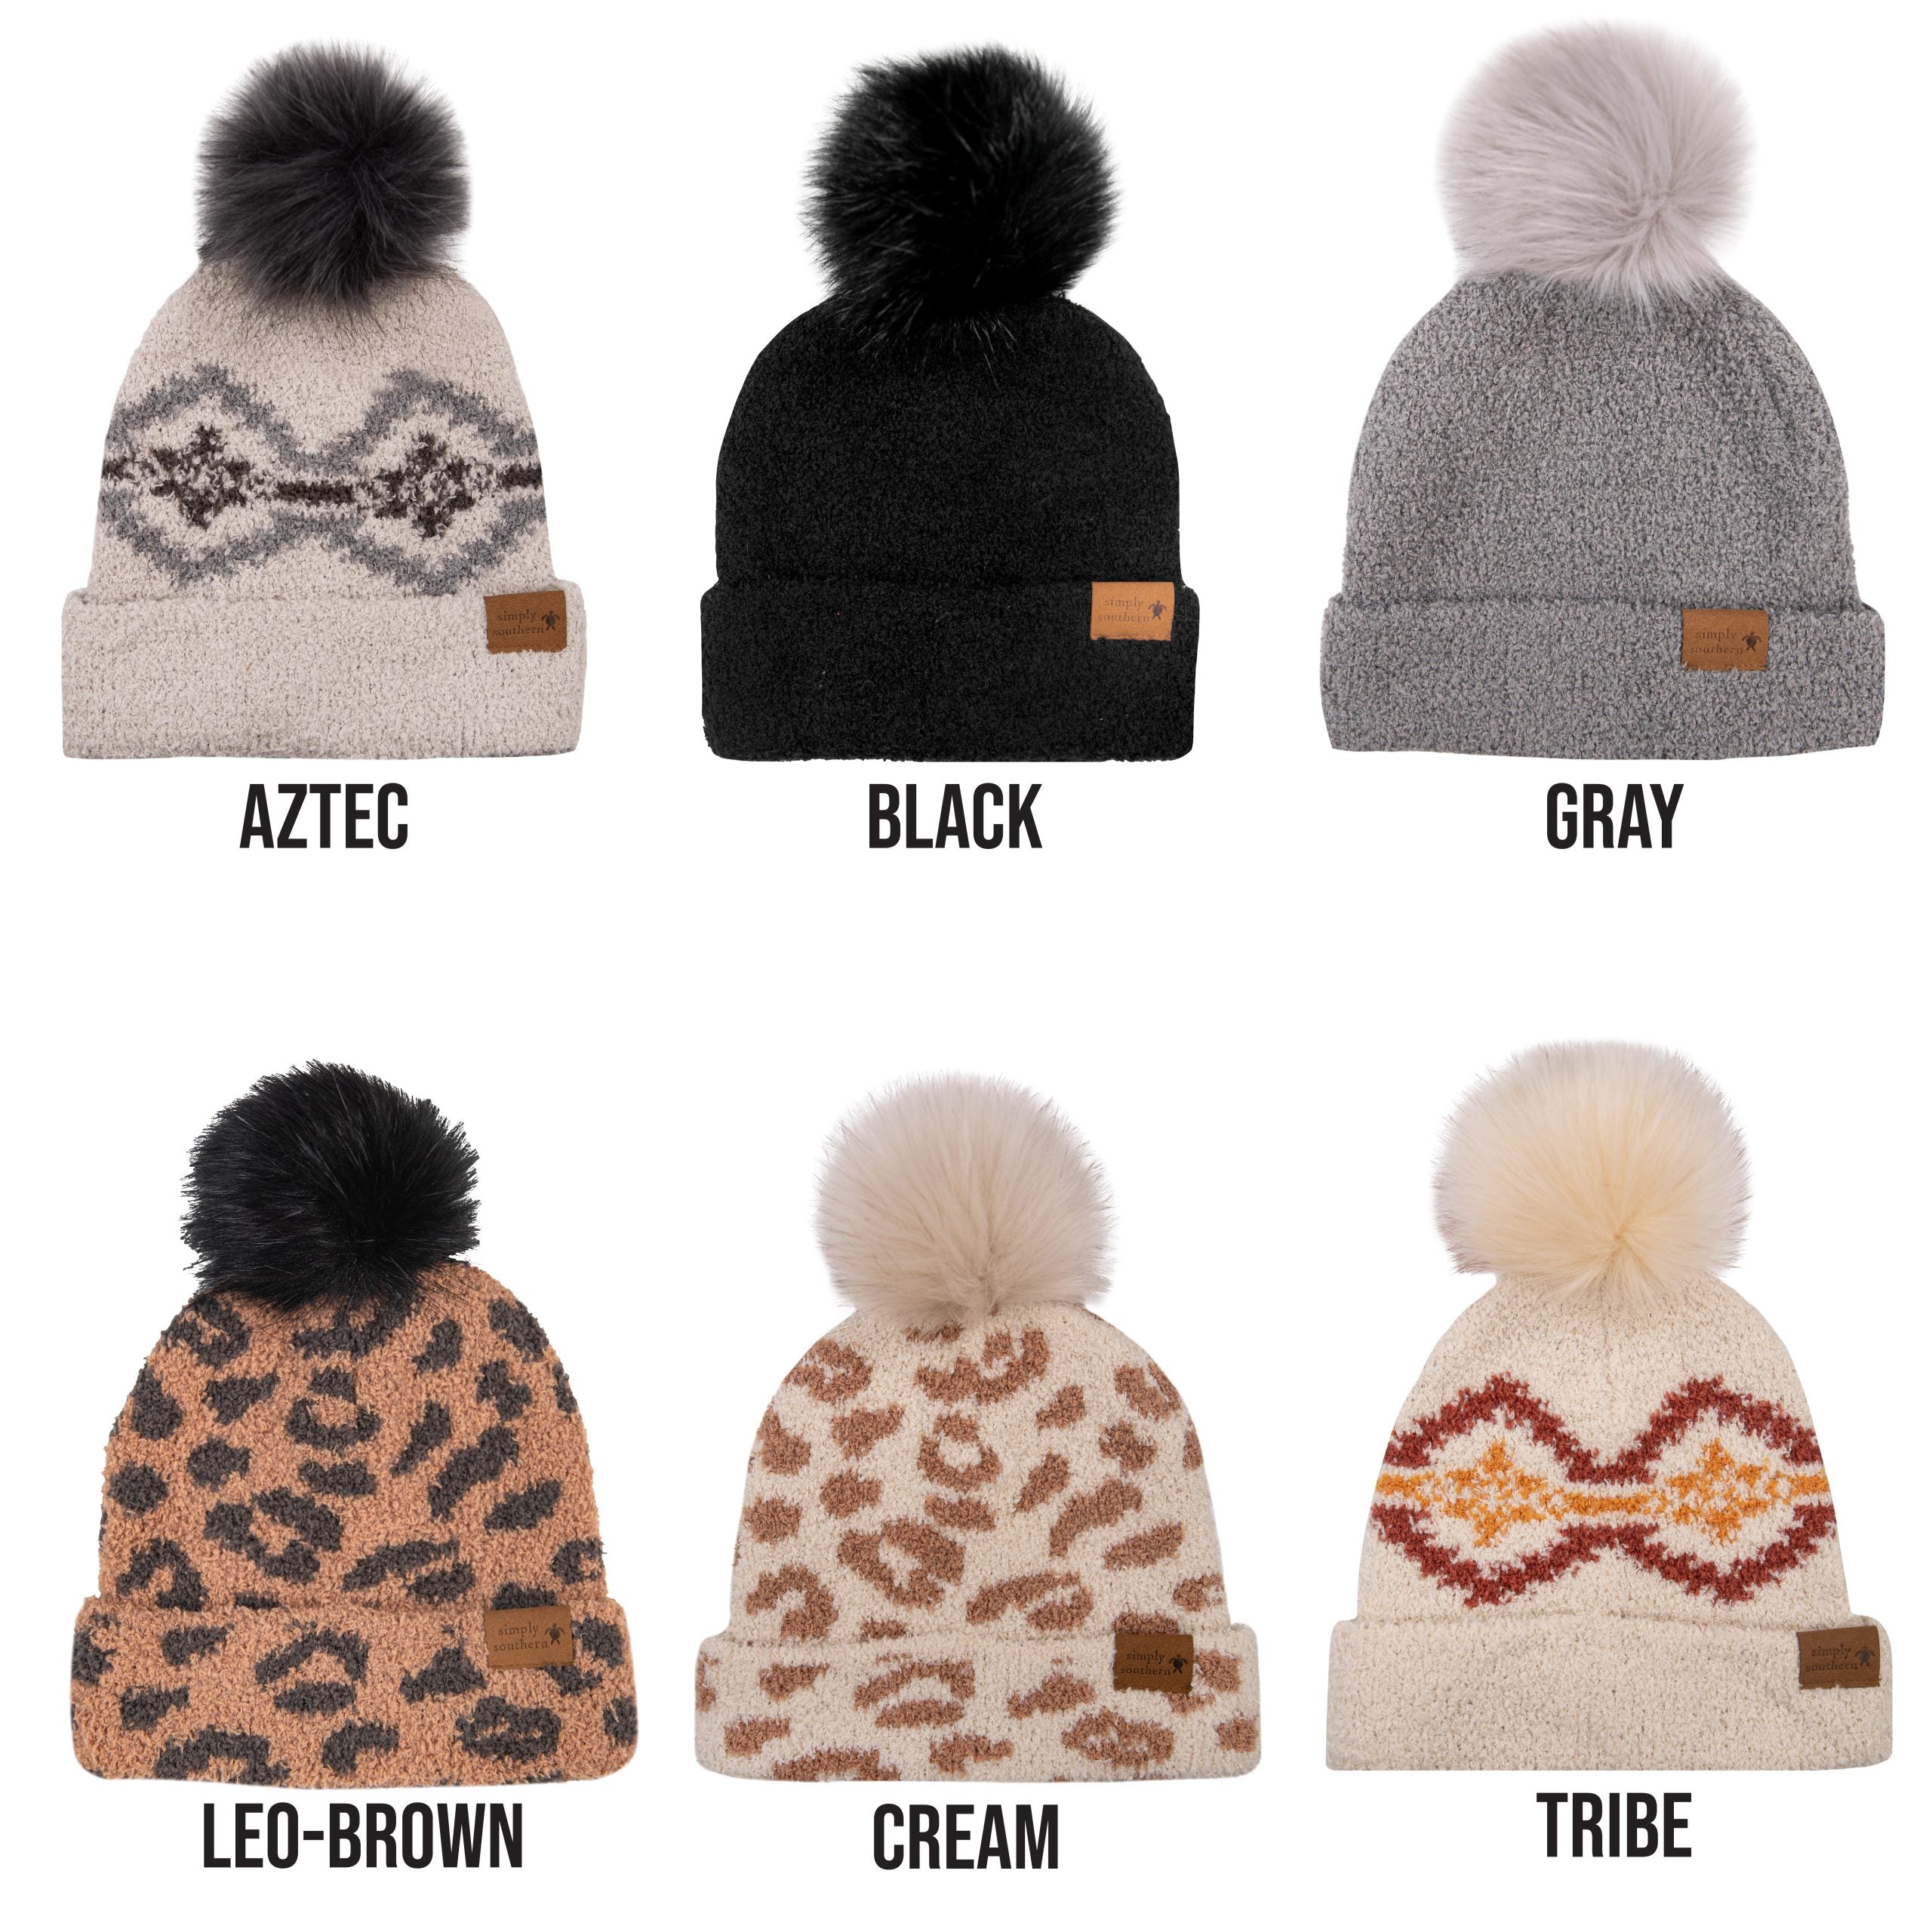 Fuzzy Beanies by Simply Southern